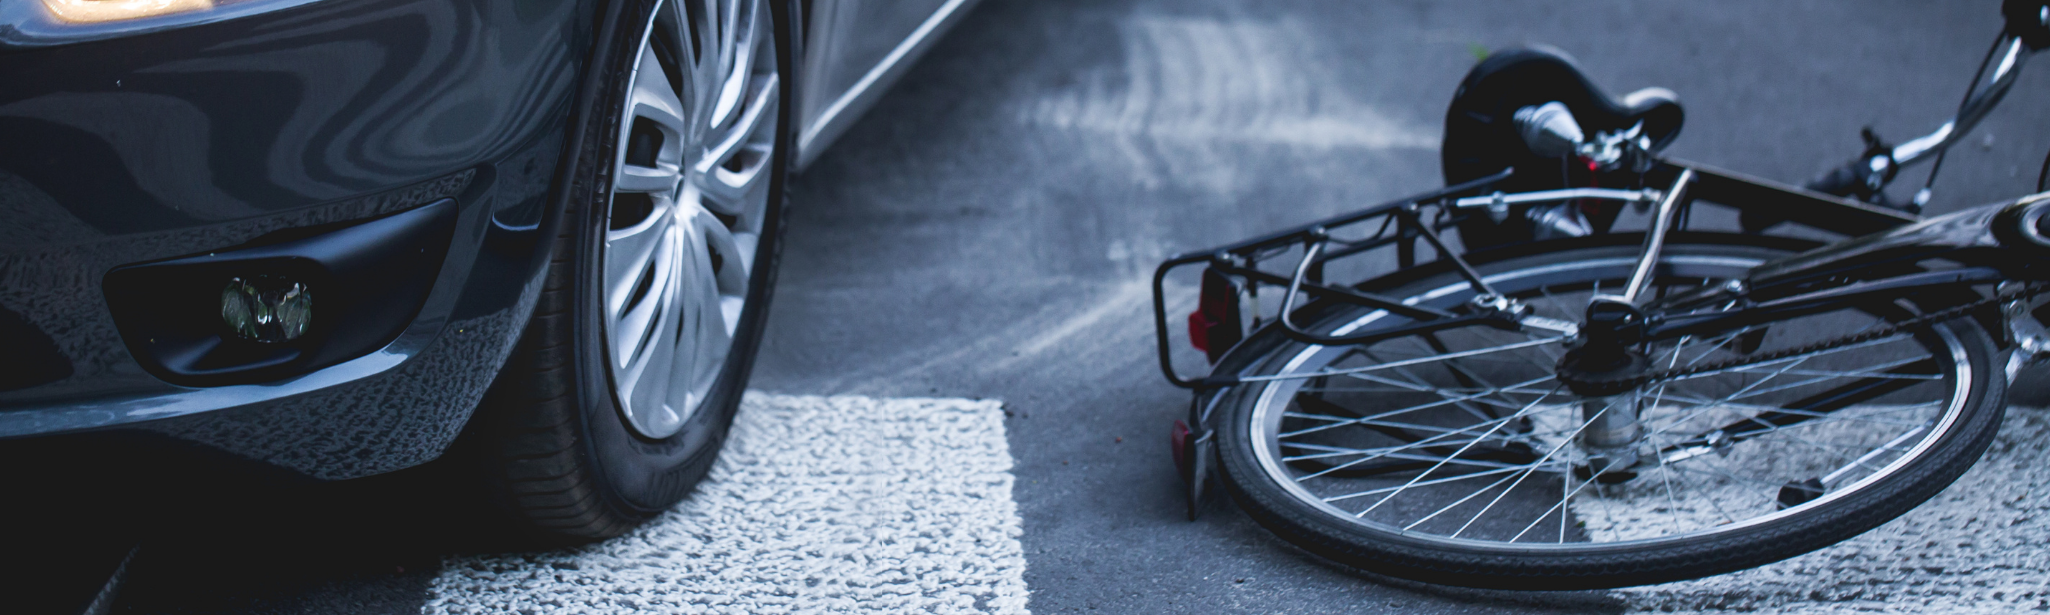 Lawyer bicycle accident Bicycle Accident